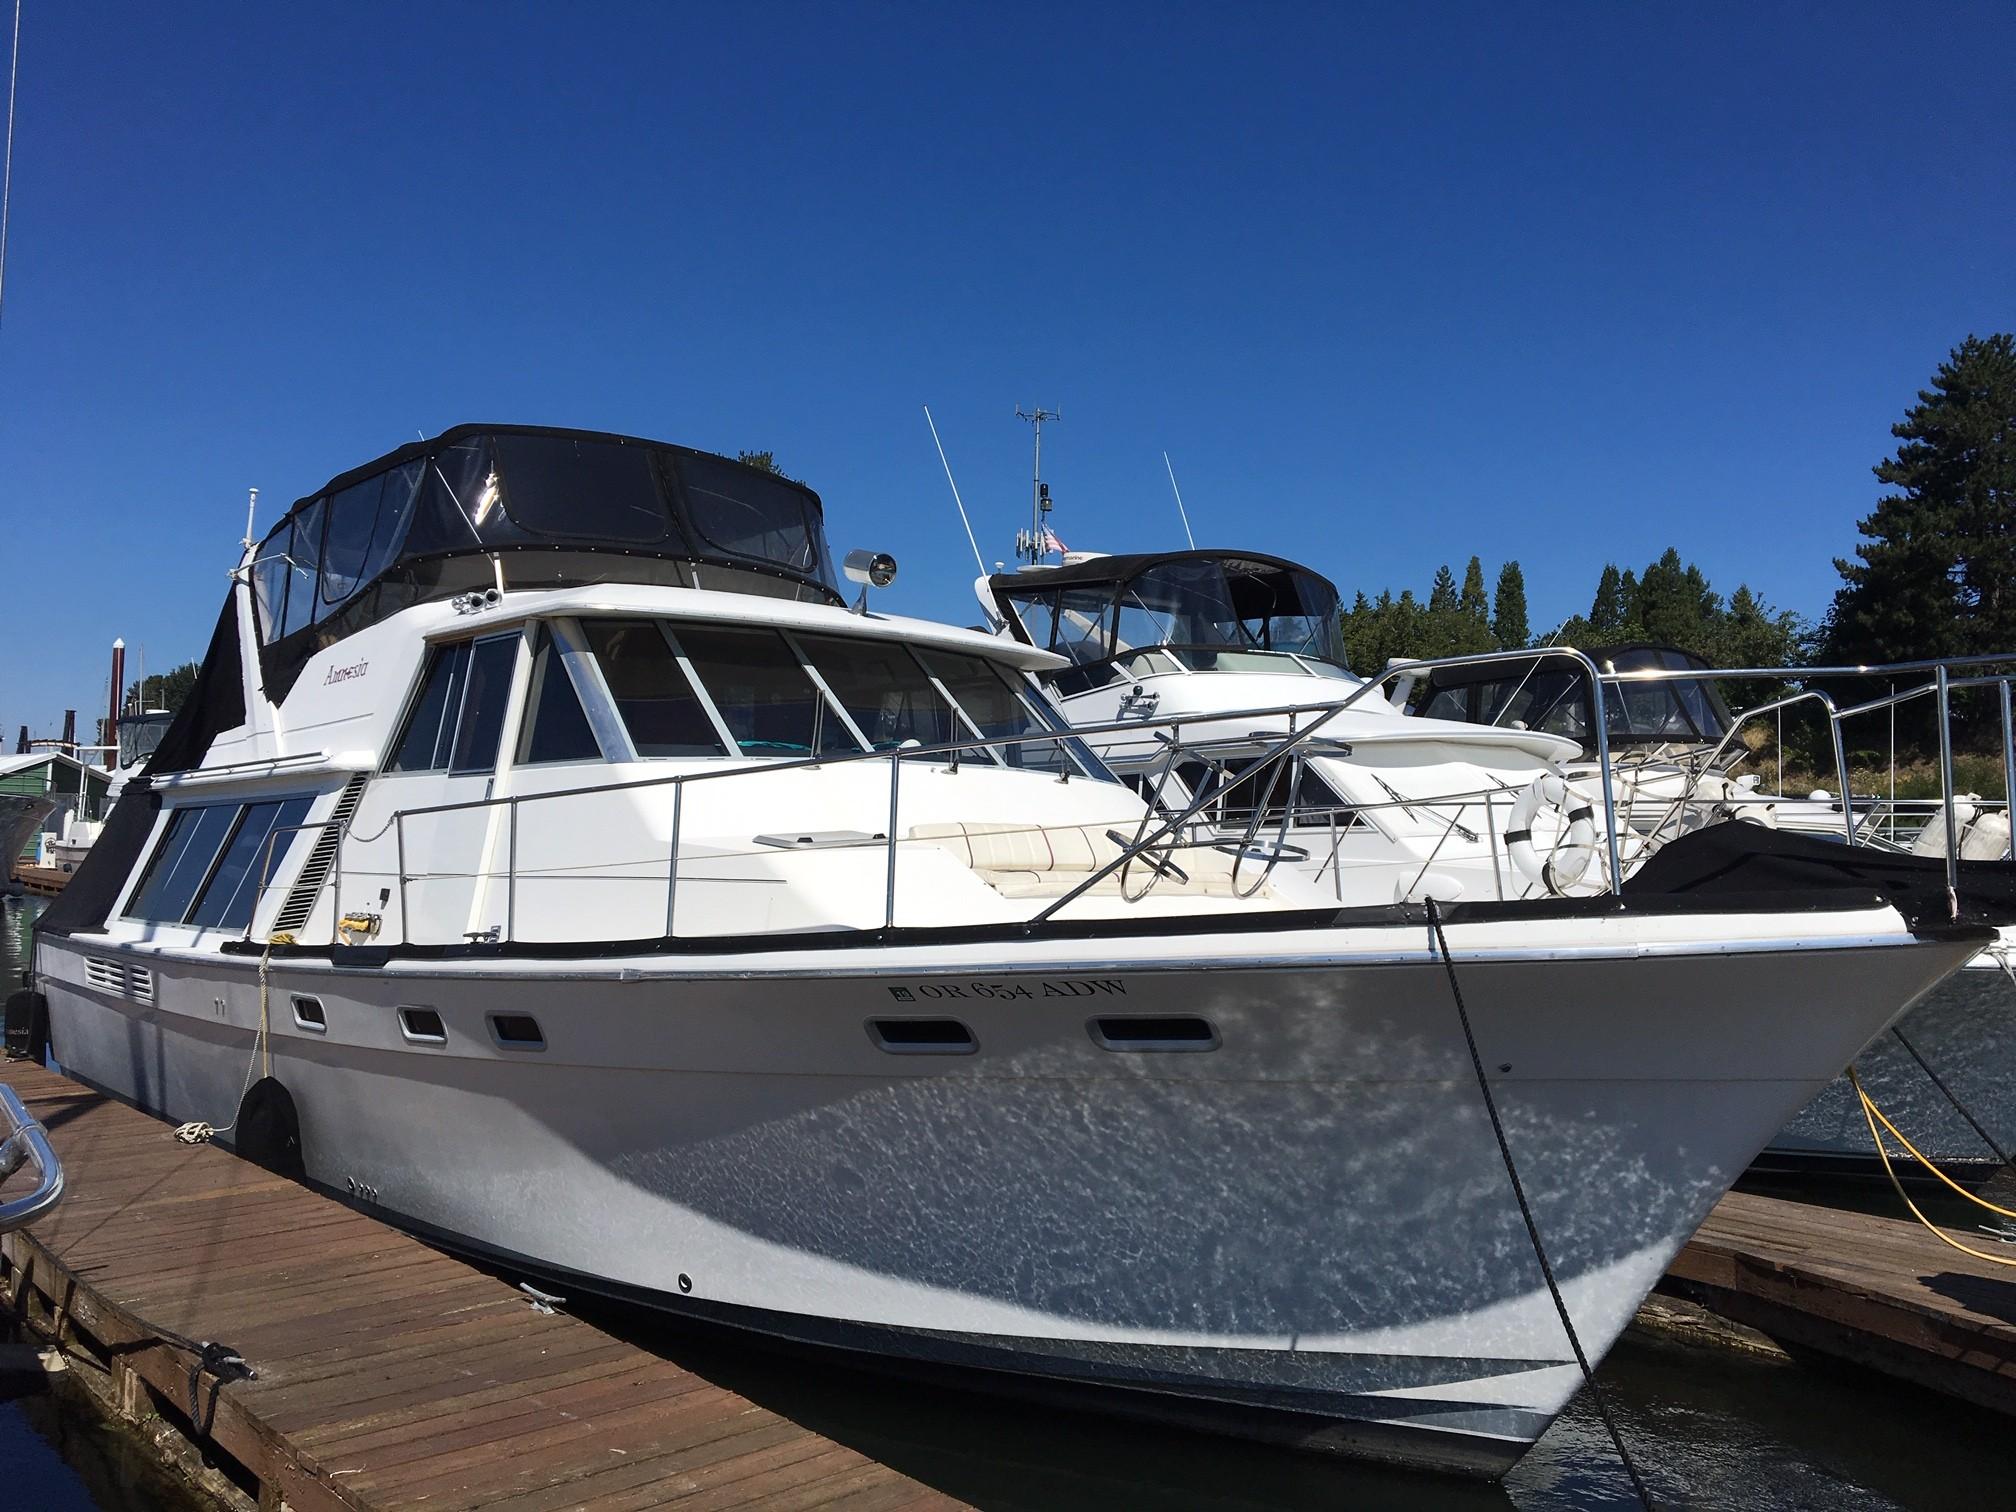 yachts for sale in portland